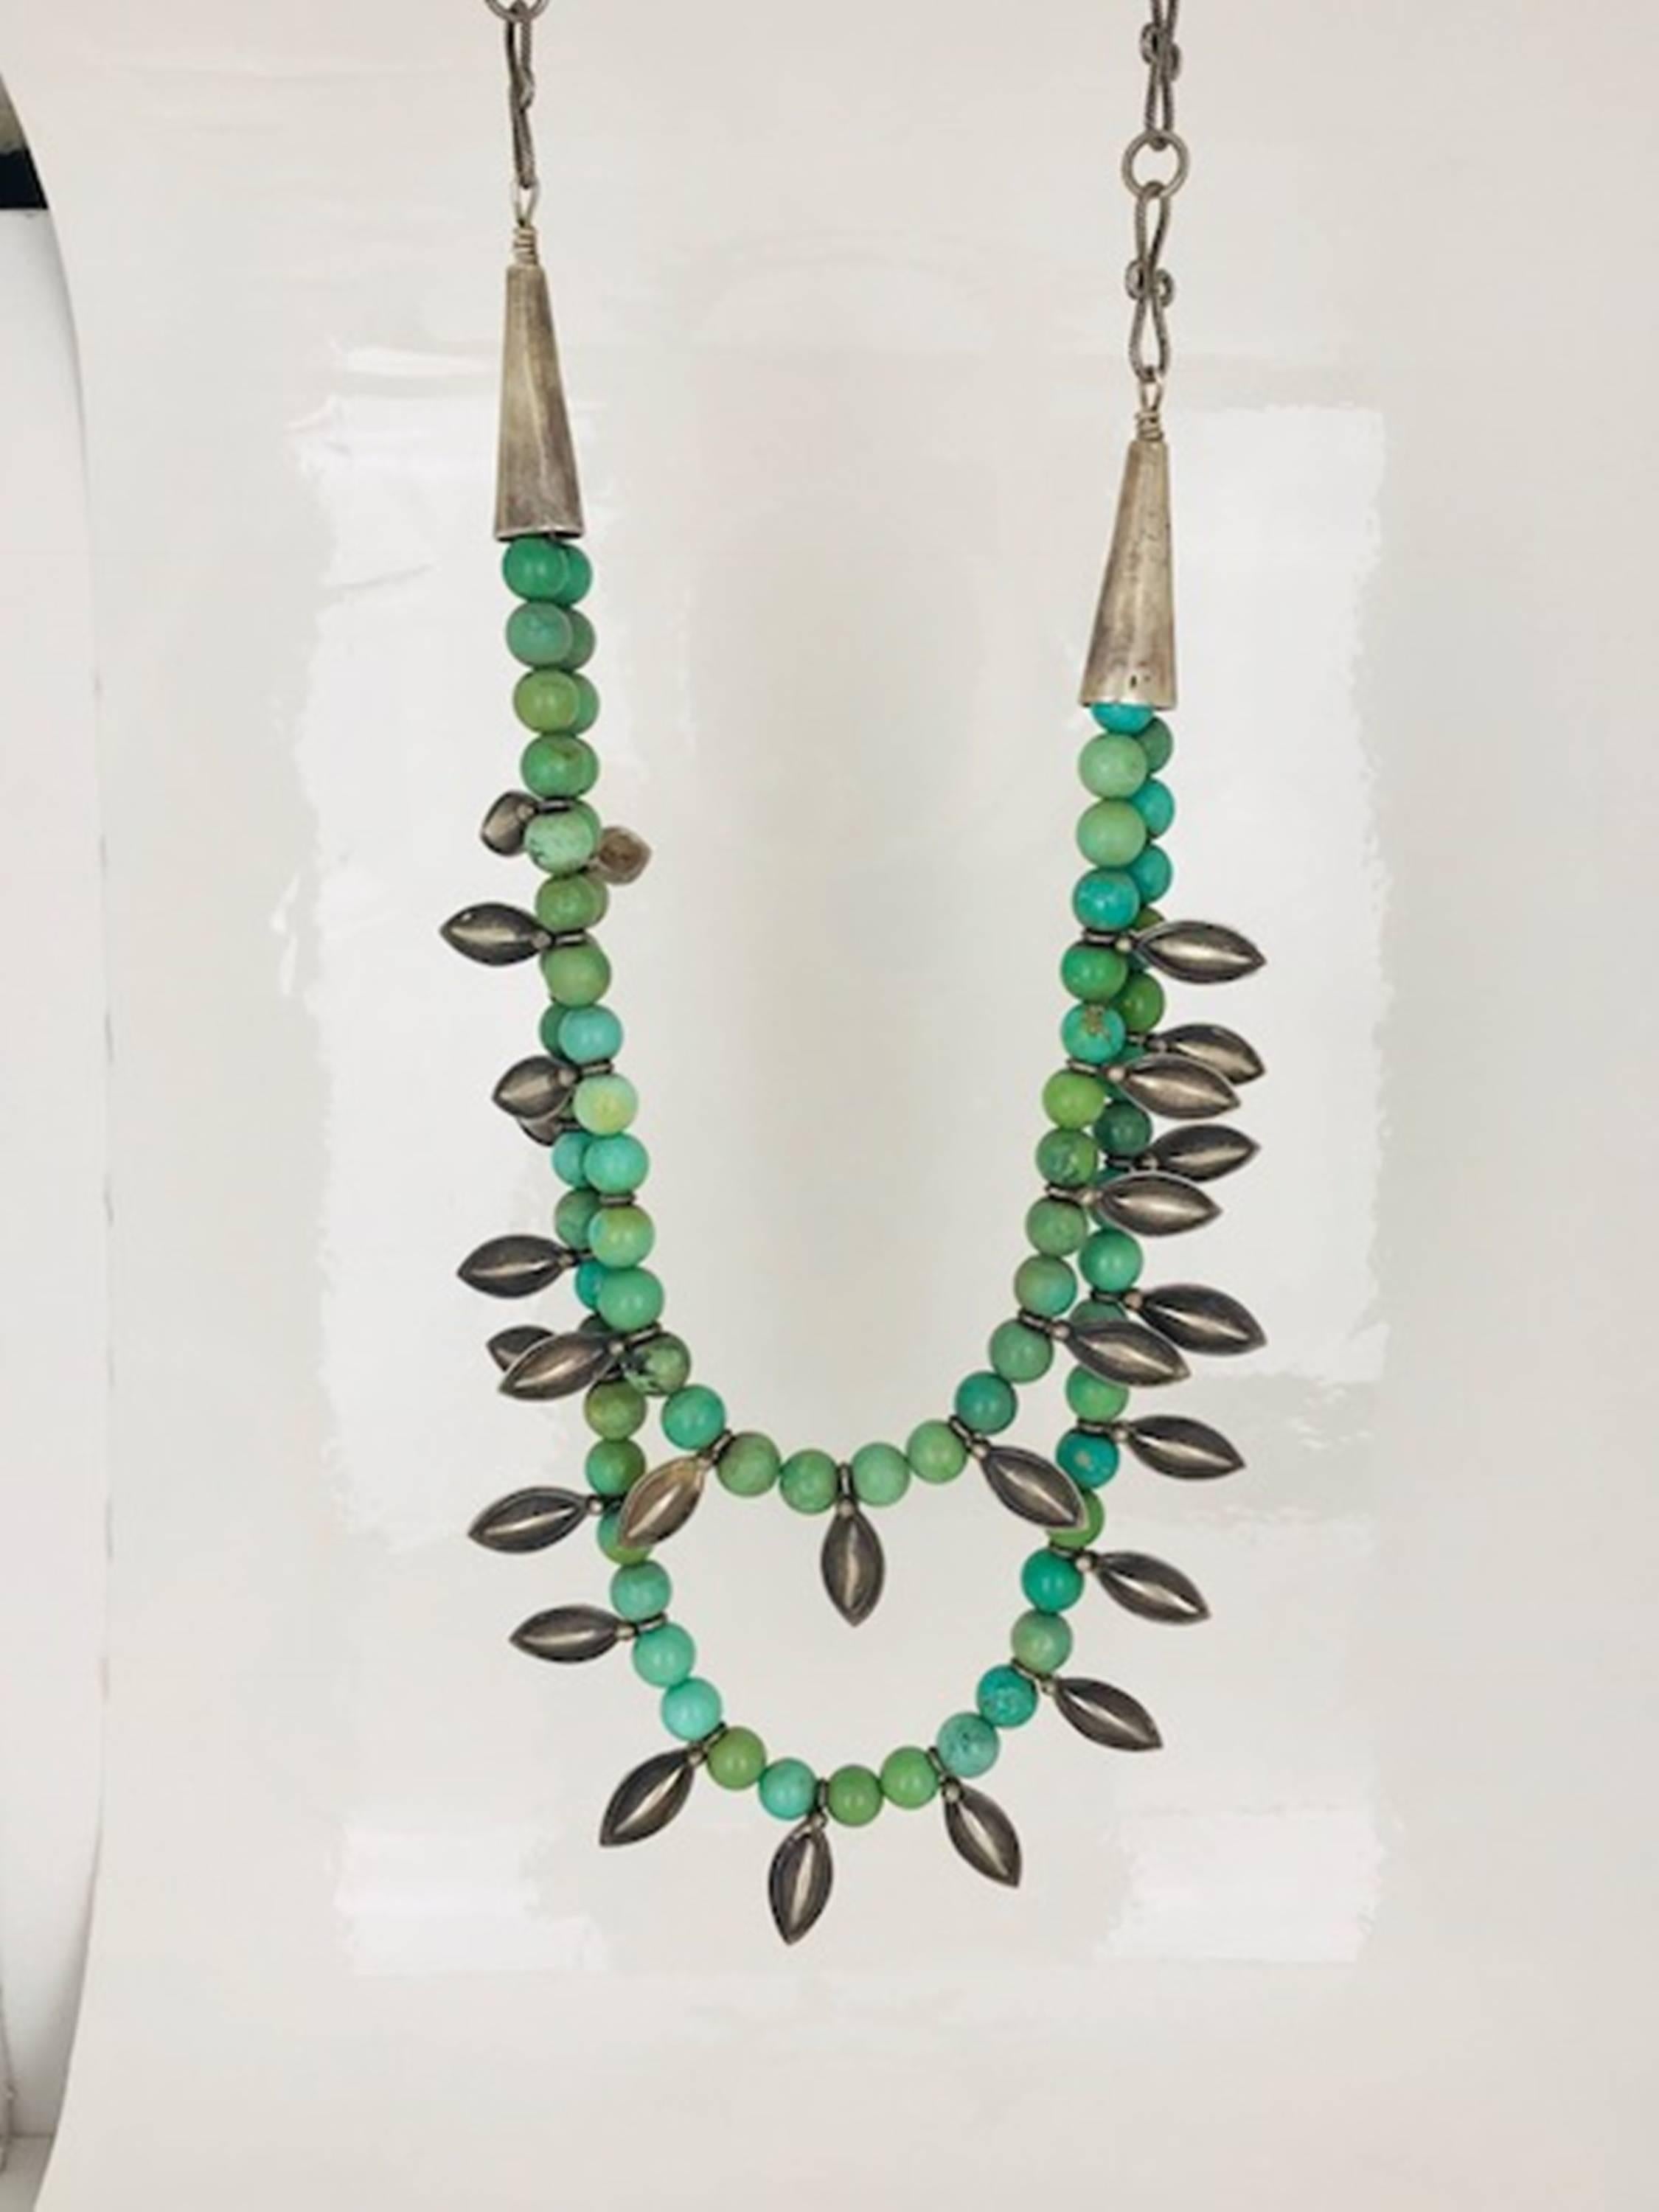 Handmade, Ethiopian tiered necklace with sterling silver leaf accents. The turquoise beads are 7-7.50 in diameter on this adjustable length necklace. 

The length of the tiered is 22 inch bottom necklace and 19 inch, top necklace. 
The necklace is